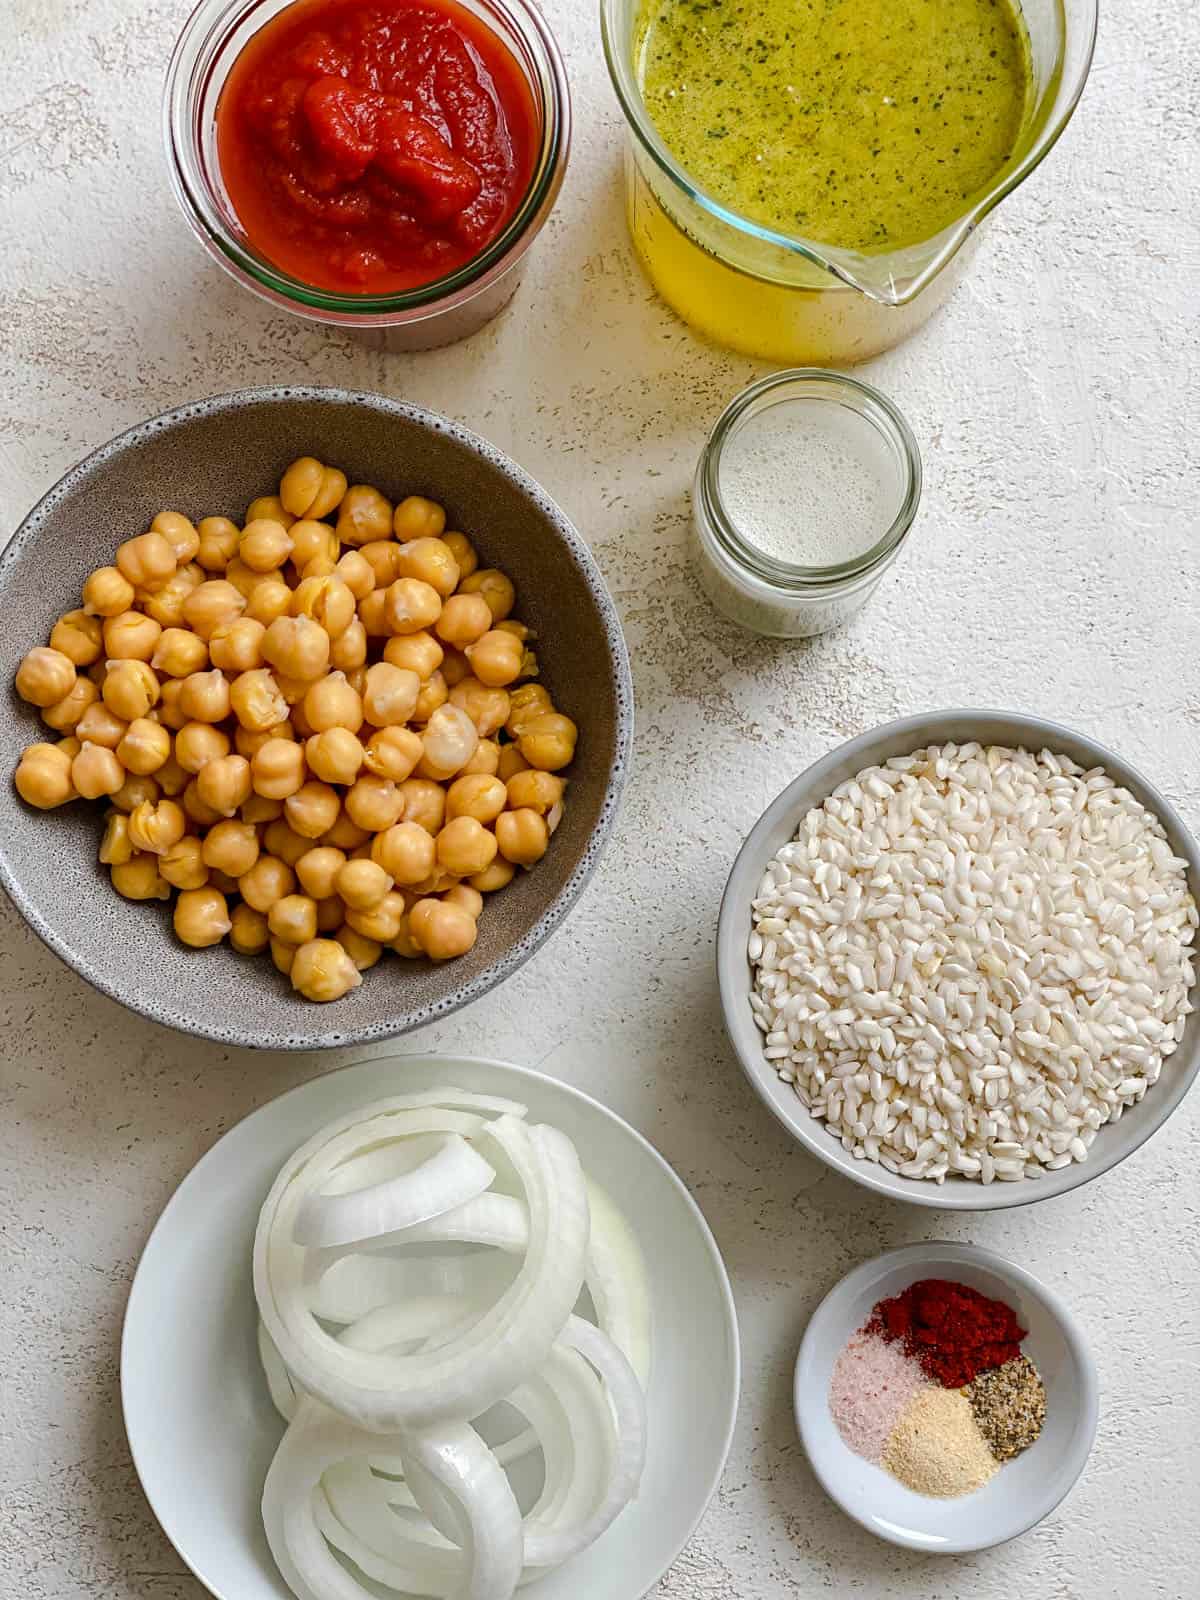 ingredients for Vegan Tandoori Chickpeas measured out against a white surface